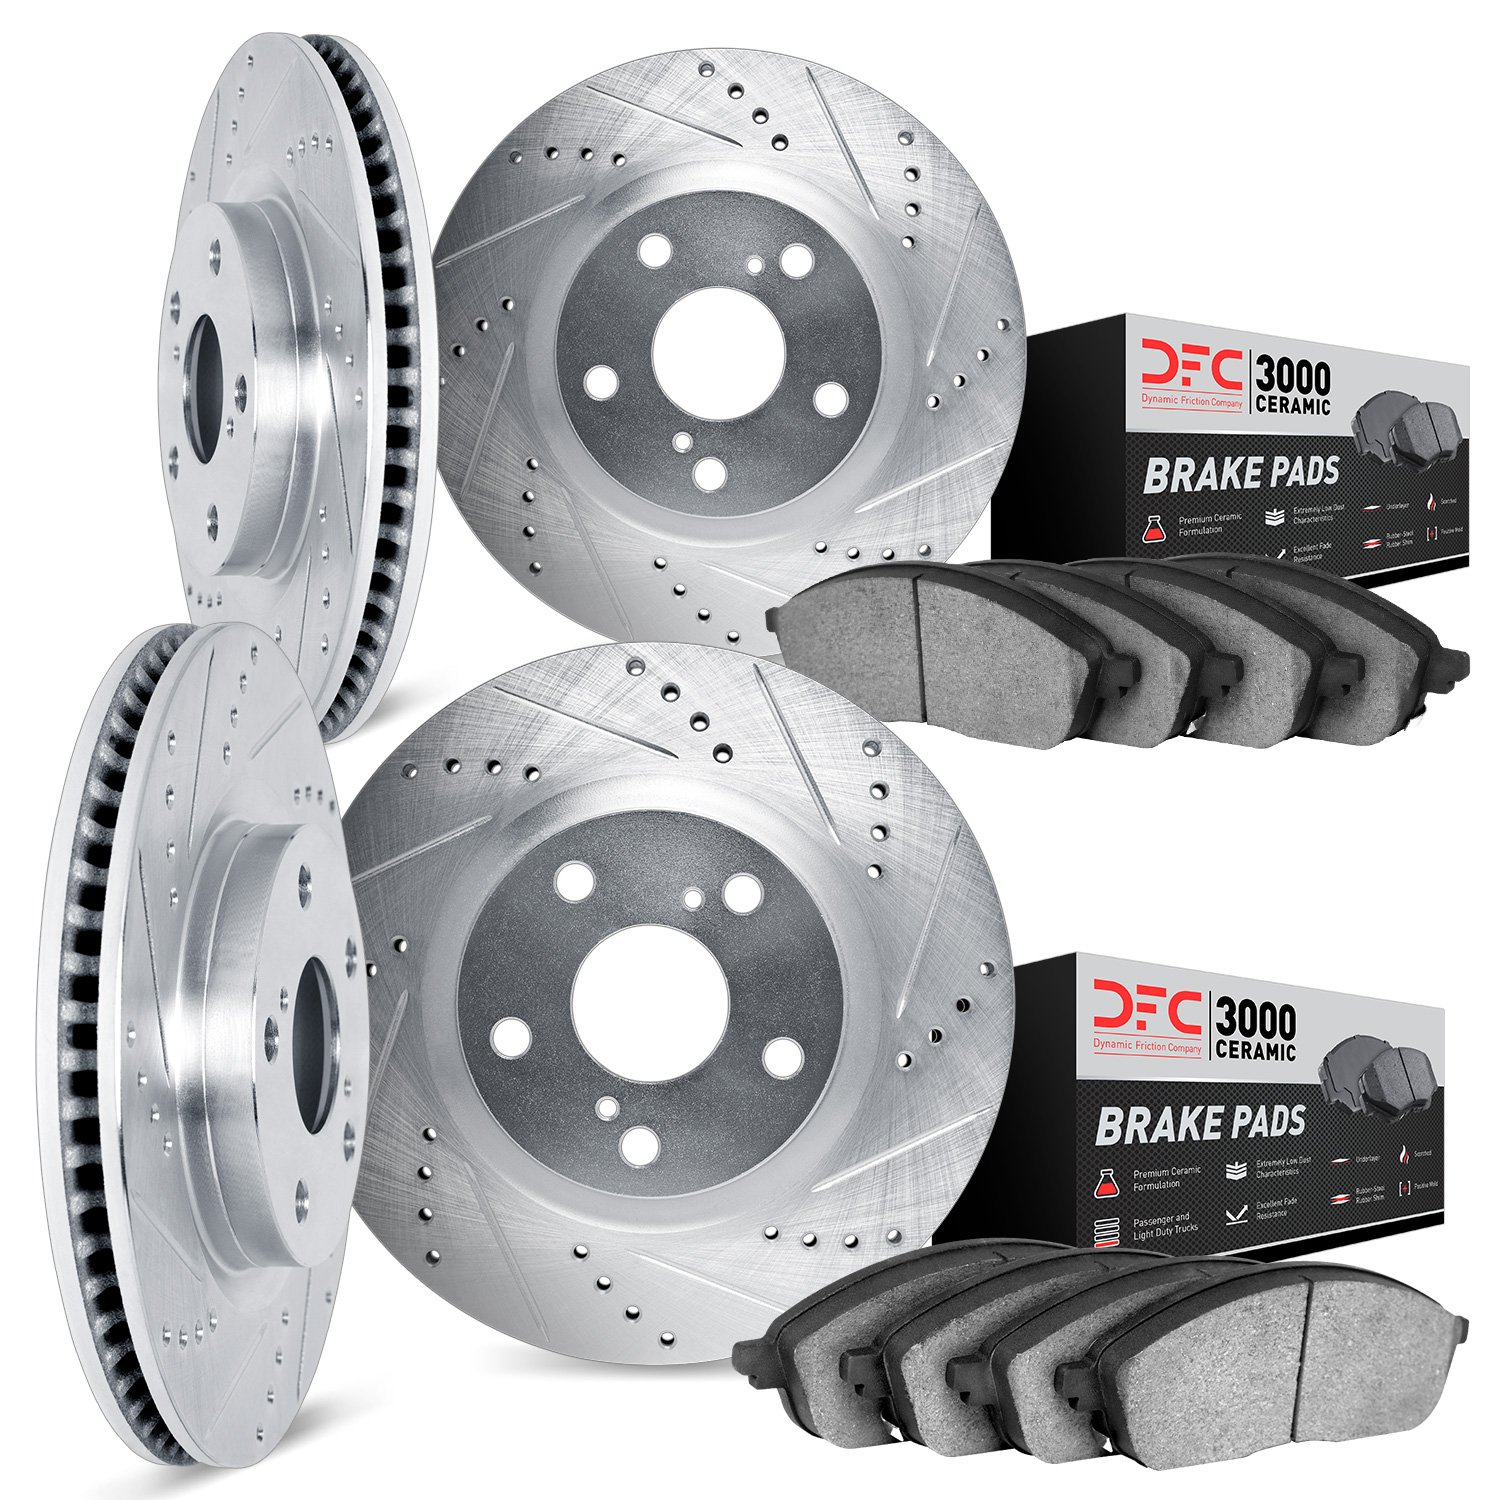 7304-75002 Drilled/Slotted Brake Rotor with 3000-Series Ceramic Brake Pads Kit [Silver], 1991-1992 Lexus/Toyota/Scion, Position: